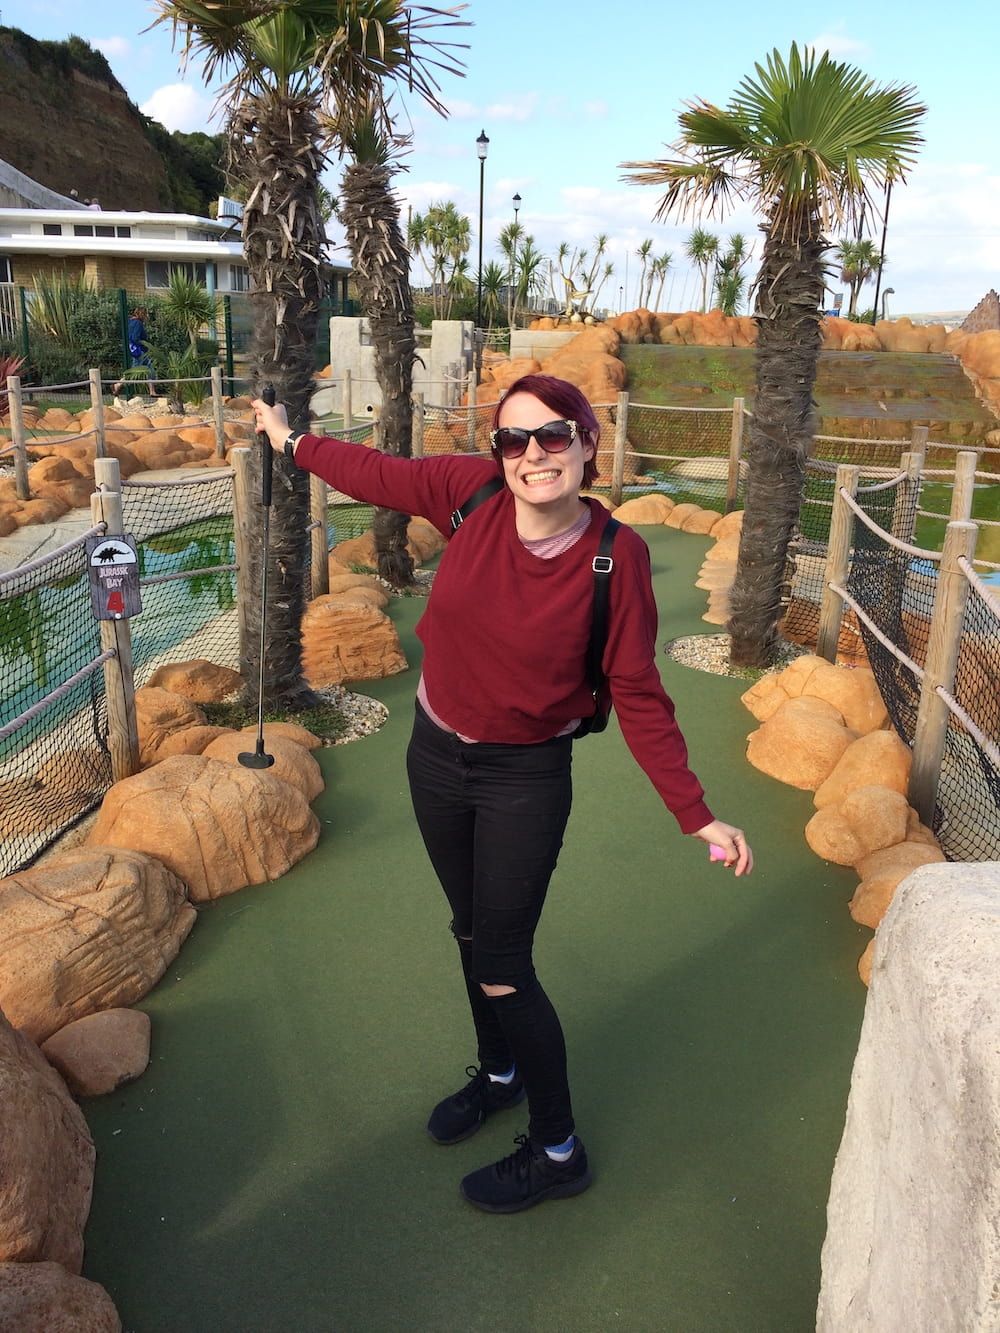 Stacey smiling playing mini golf